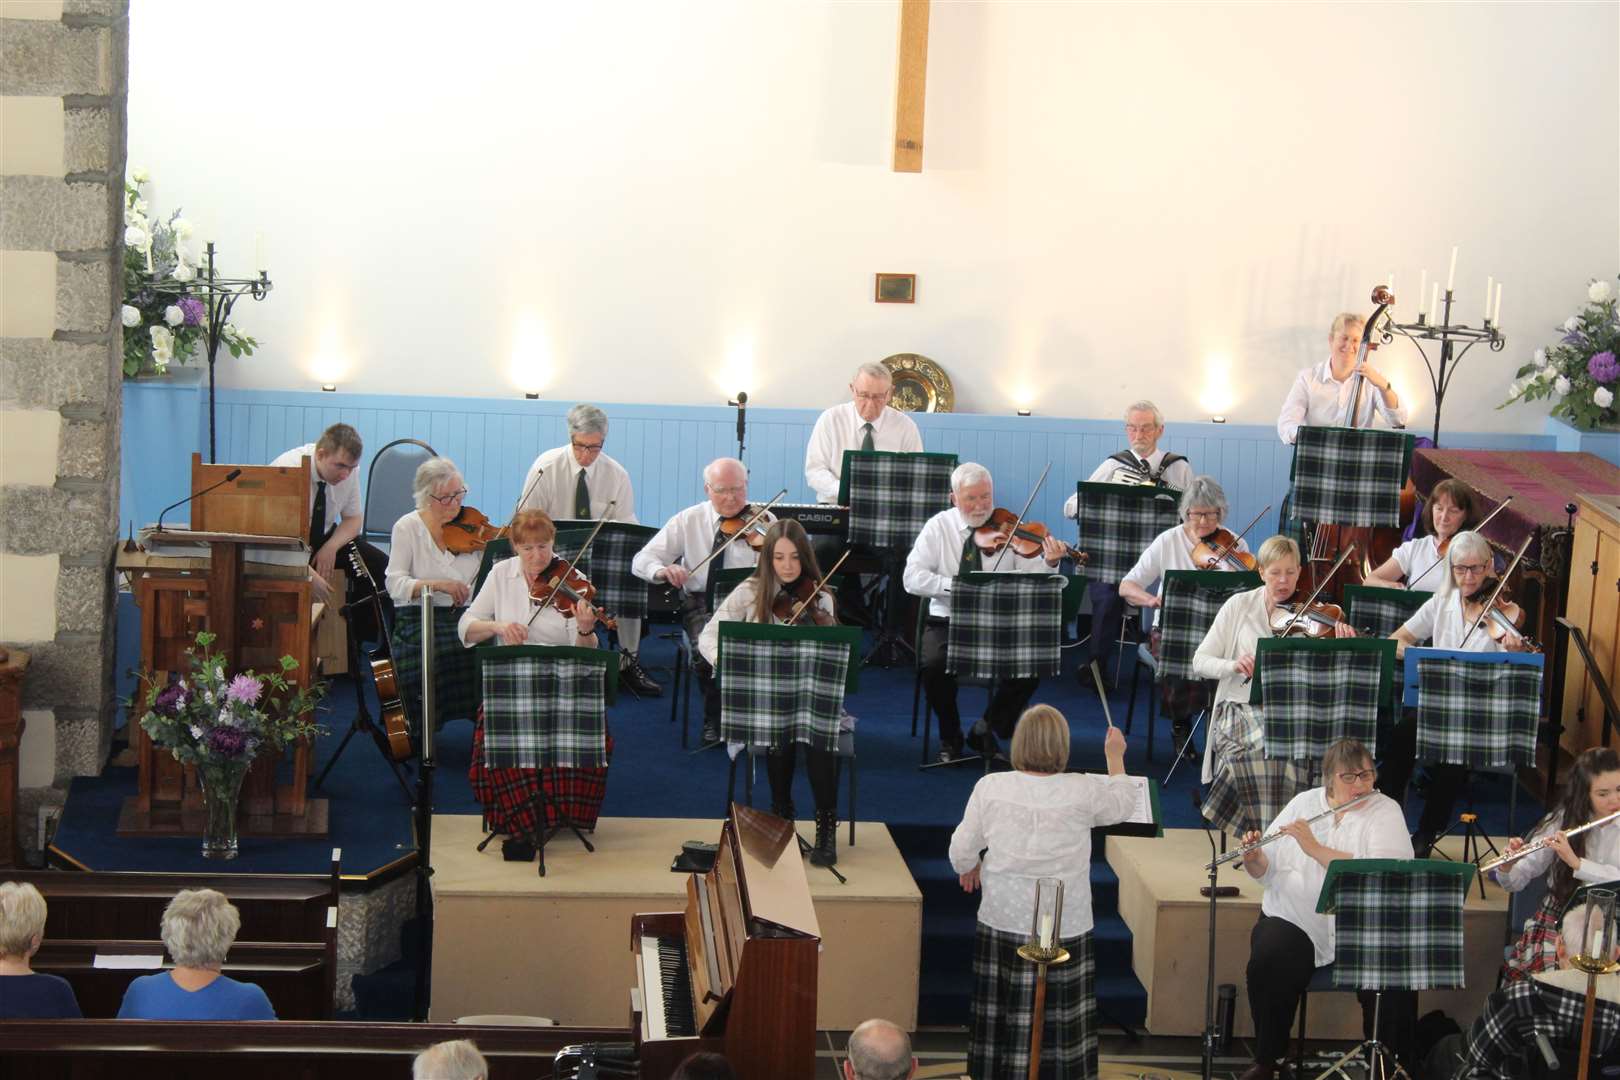 Garioch Fiddlers Scottish concert with conductor Susan Simpson at St Andrews church on Sunday afternoonPicture: Griselda McGregor